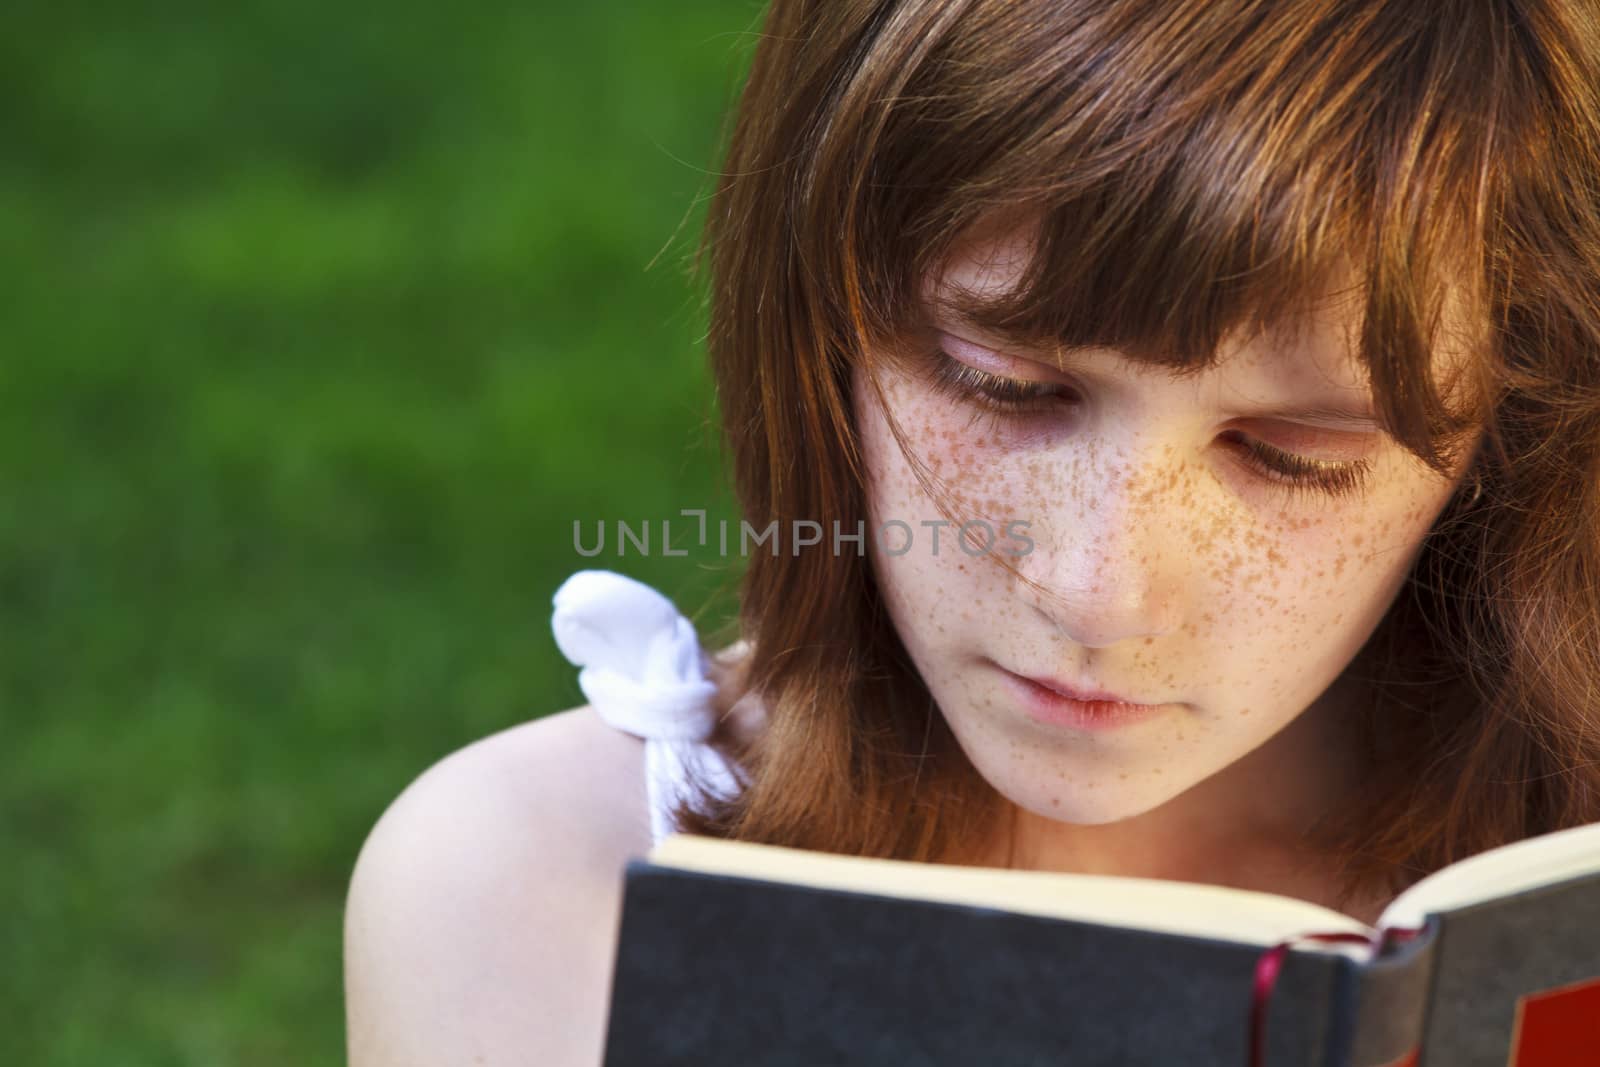 Young beautiful girl reading a book outdoor